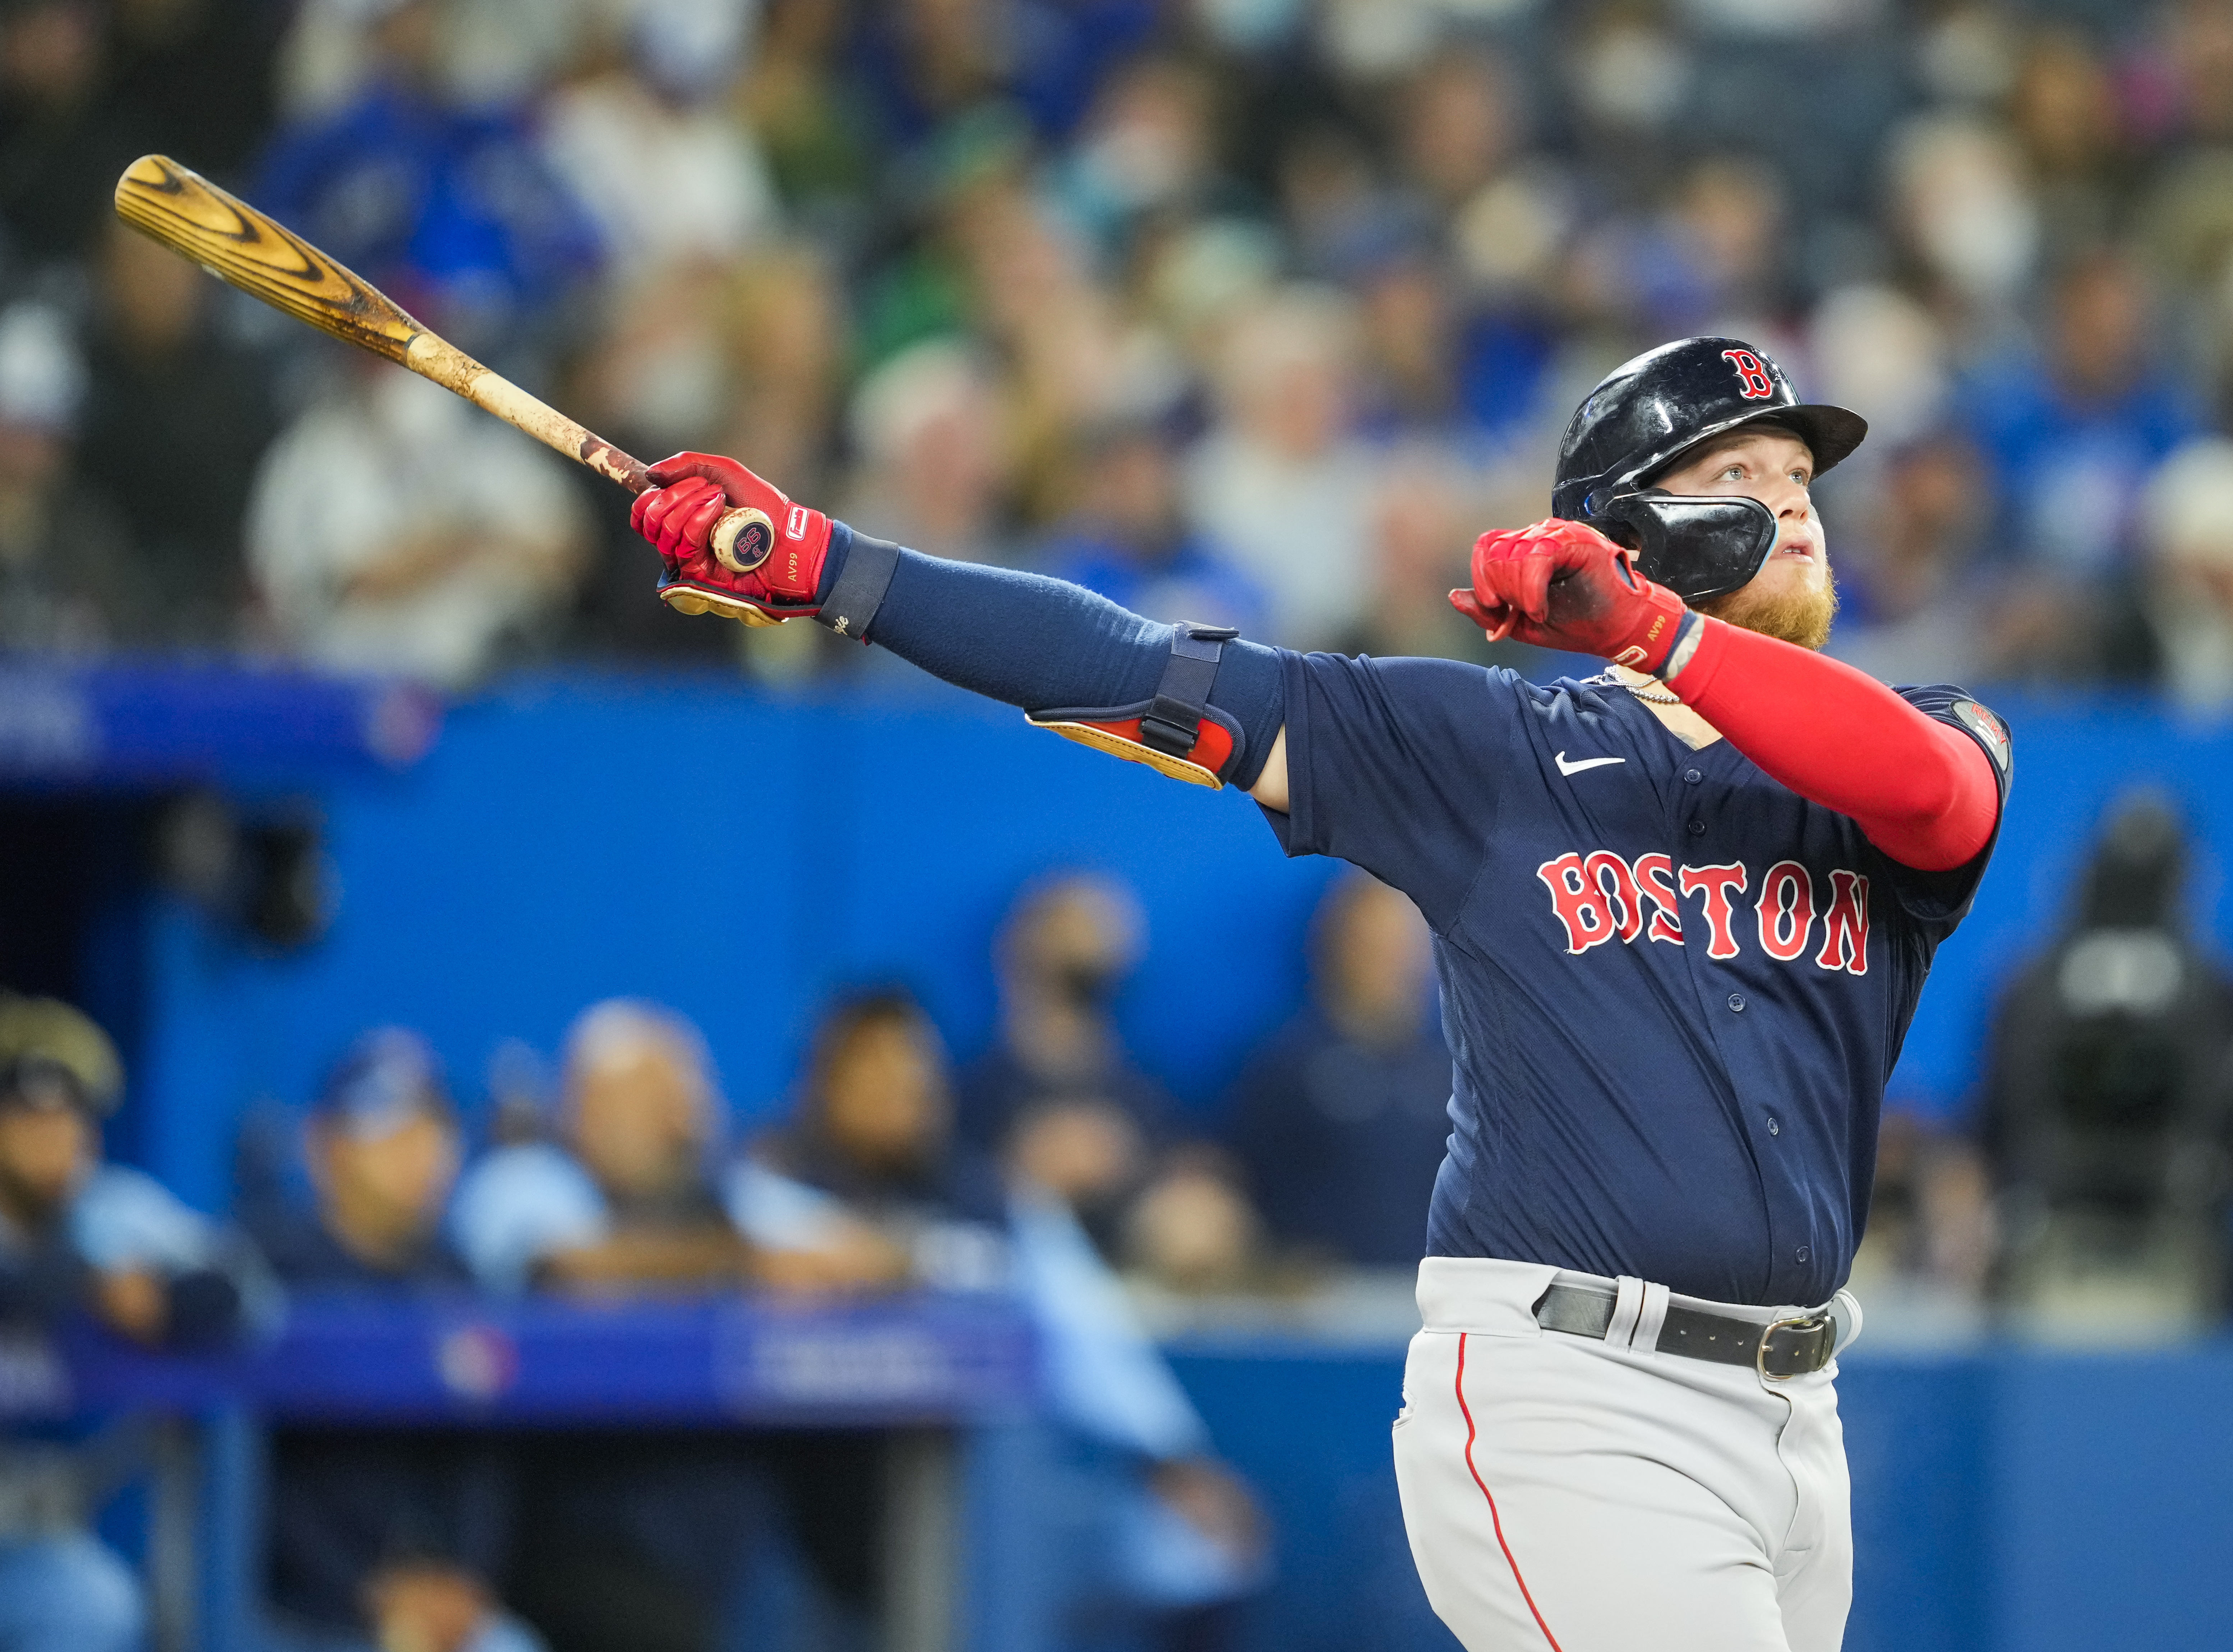 Boston Red Sox 2021 Season Preview: Will Alex Verdugo be more aggressive to  avoid strikeouts? - Over the Monster